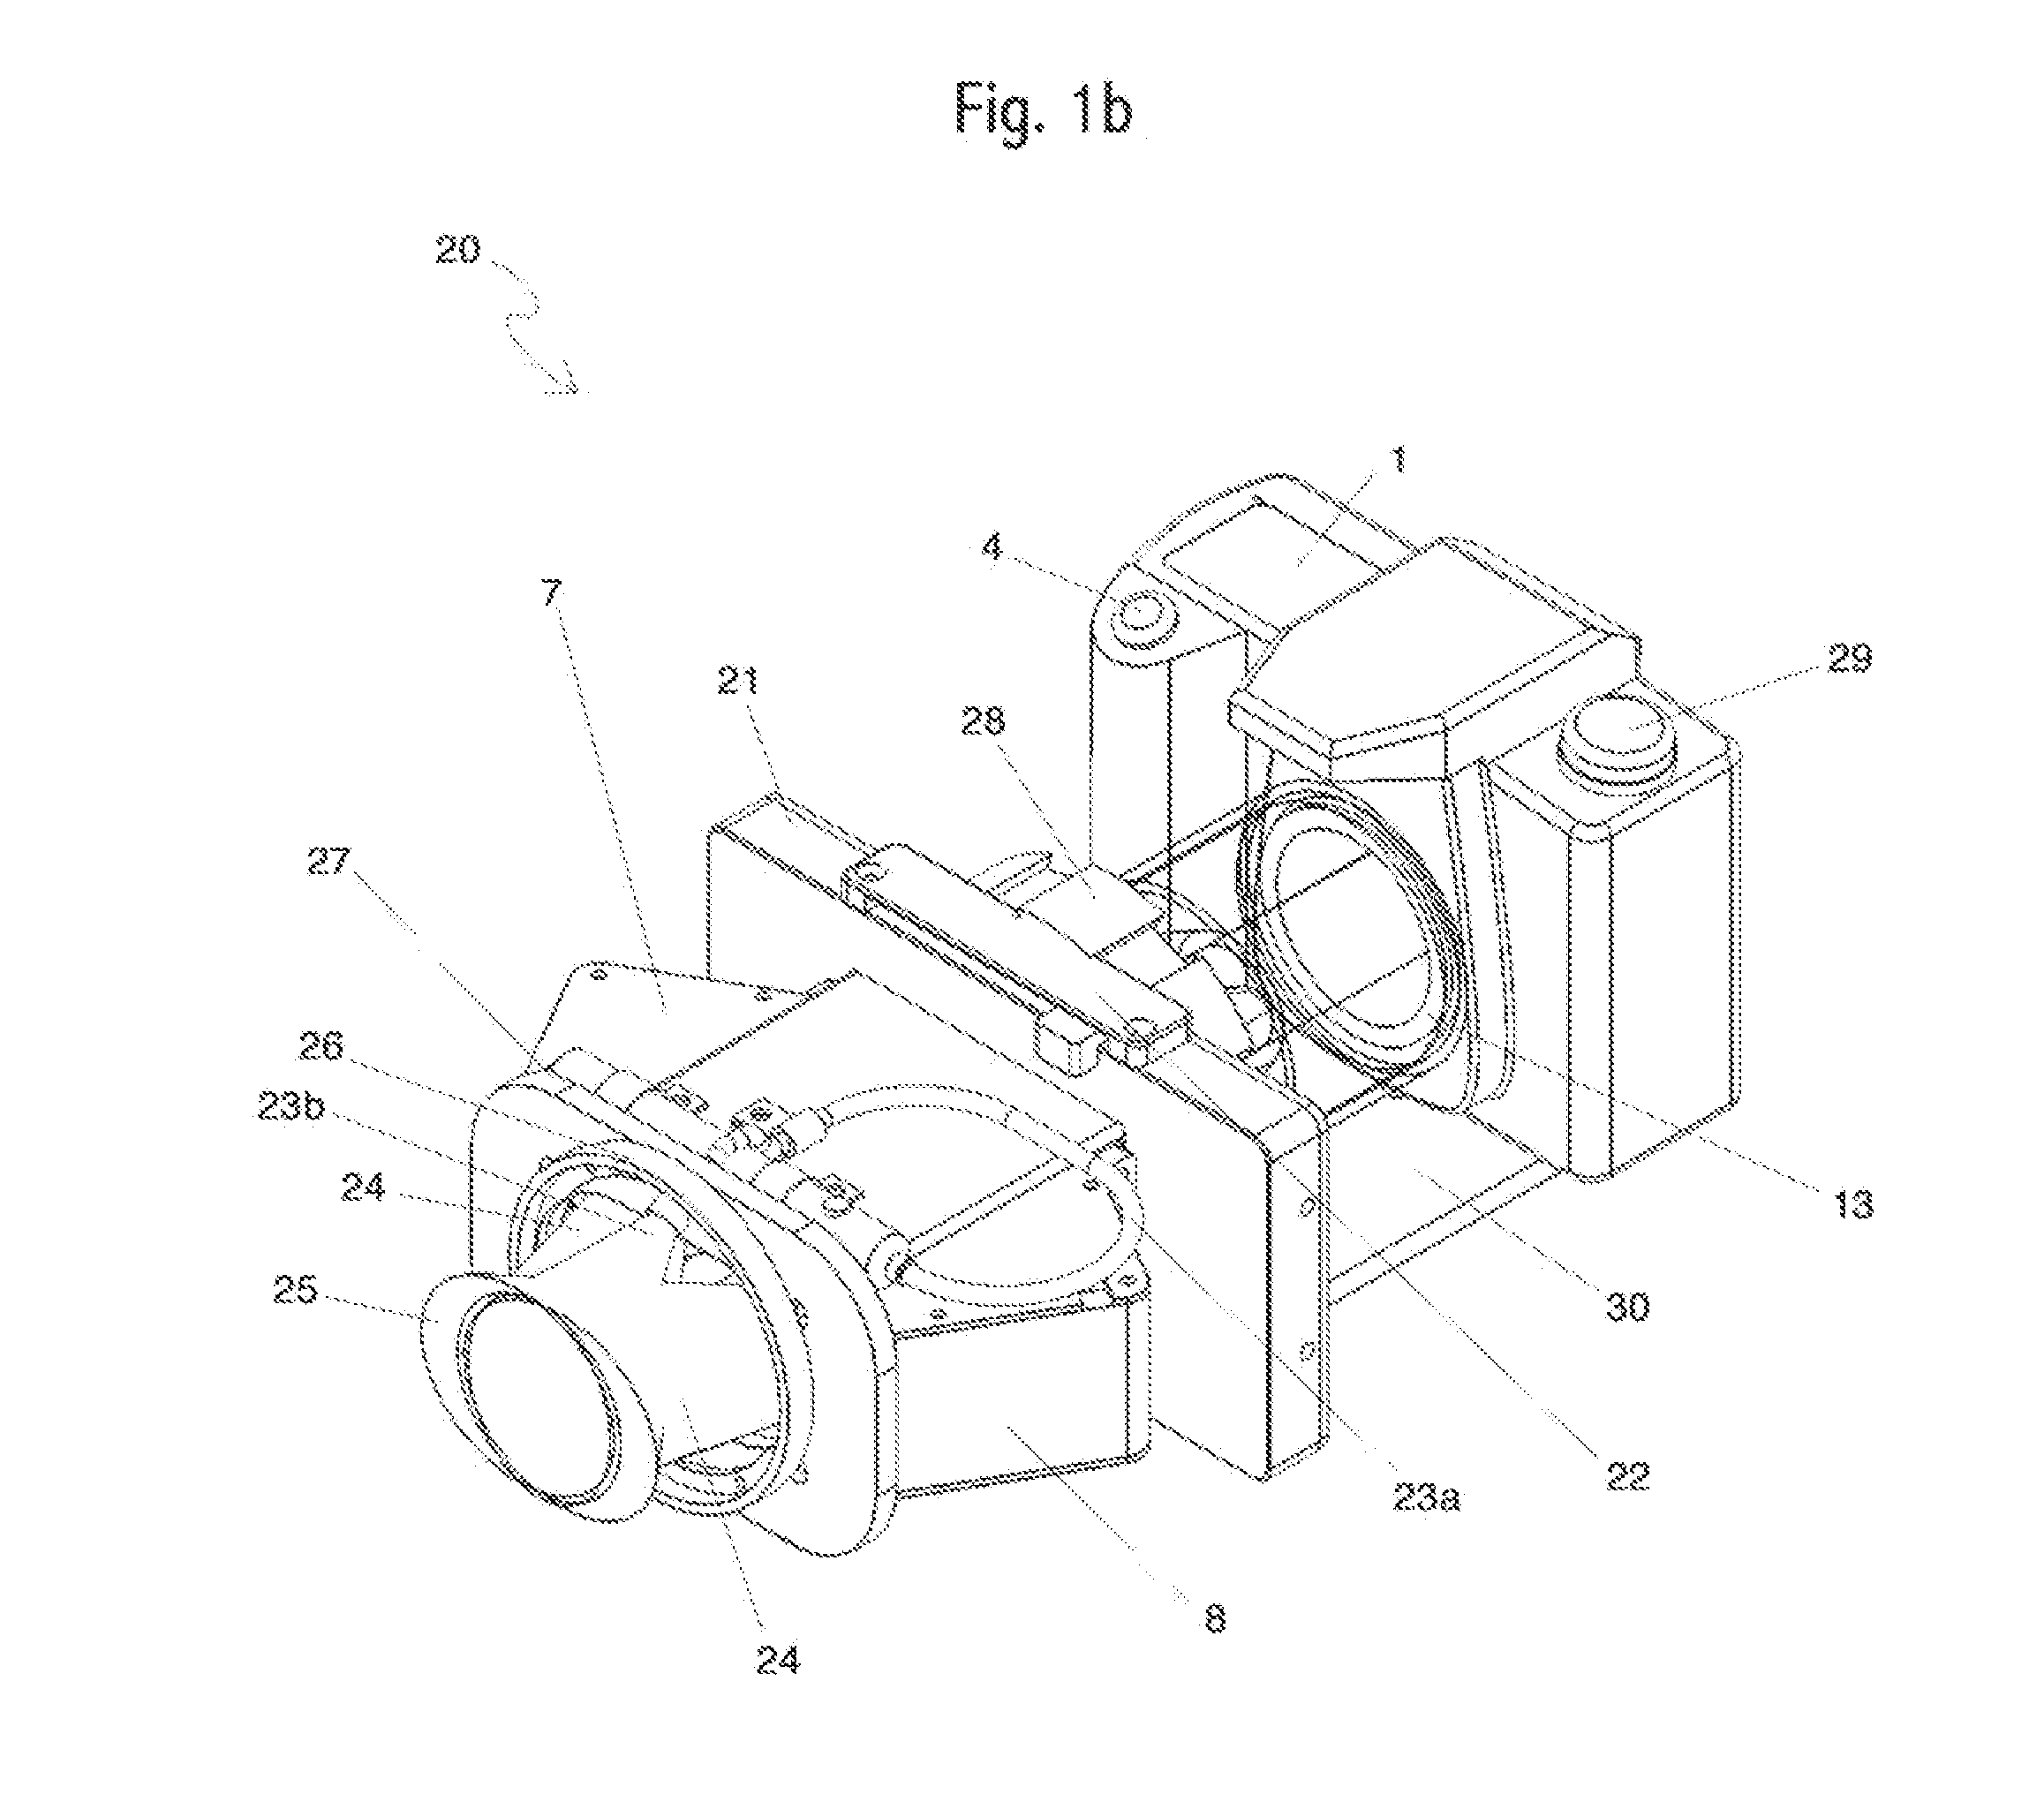 System for Imaging Lesions Aligning Tissue Surfaces